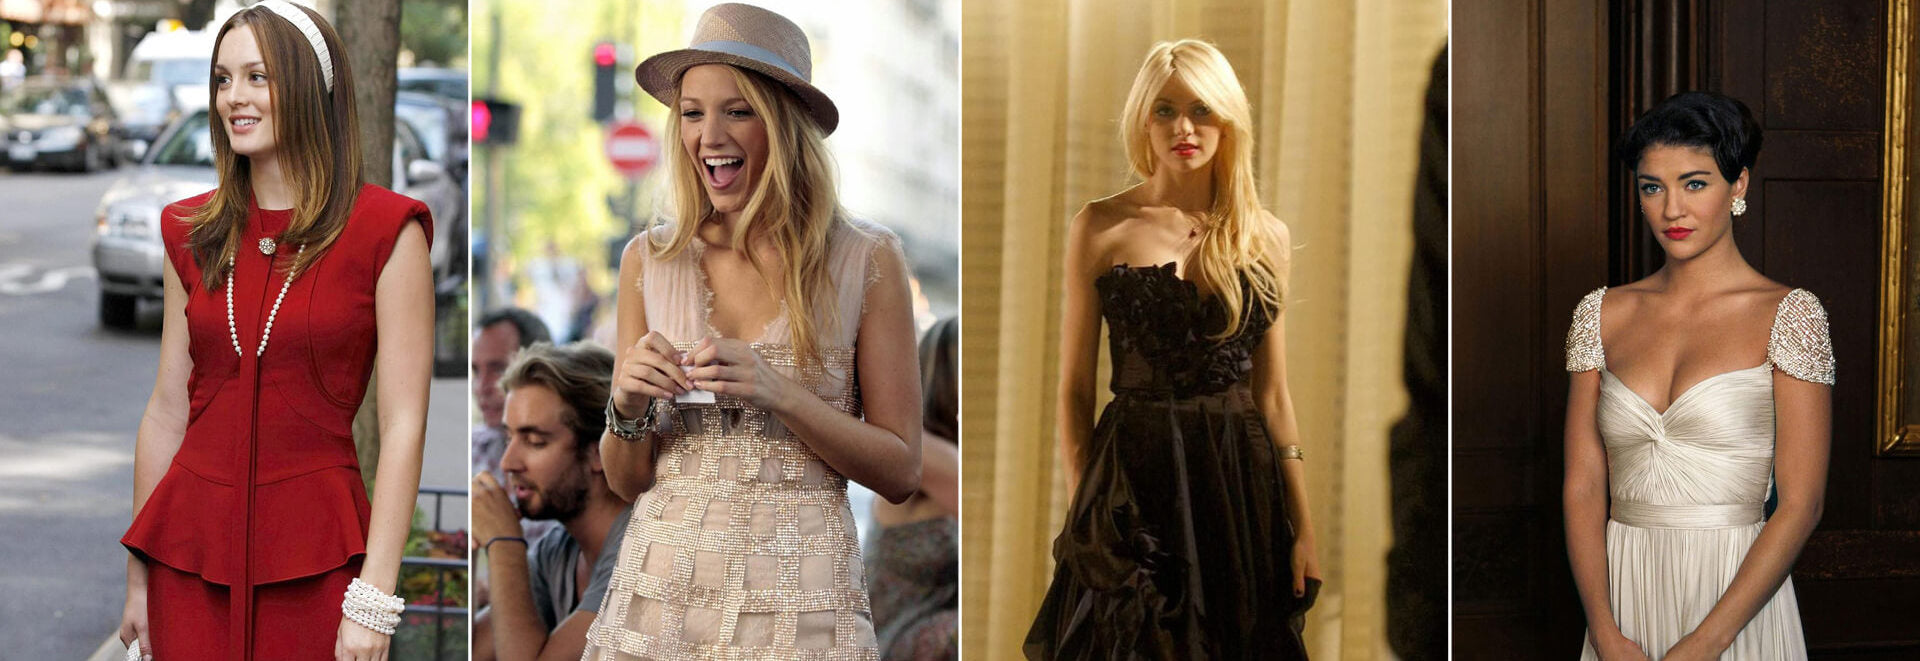 A Look At Our Favorite Gossip Girl Fashion Looks